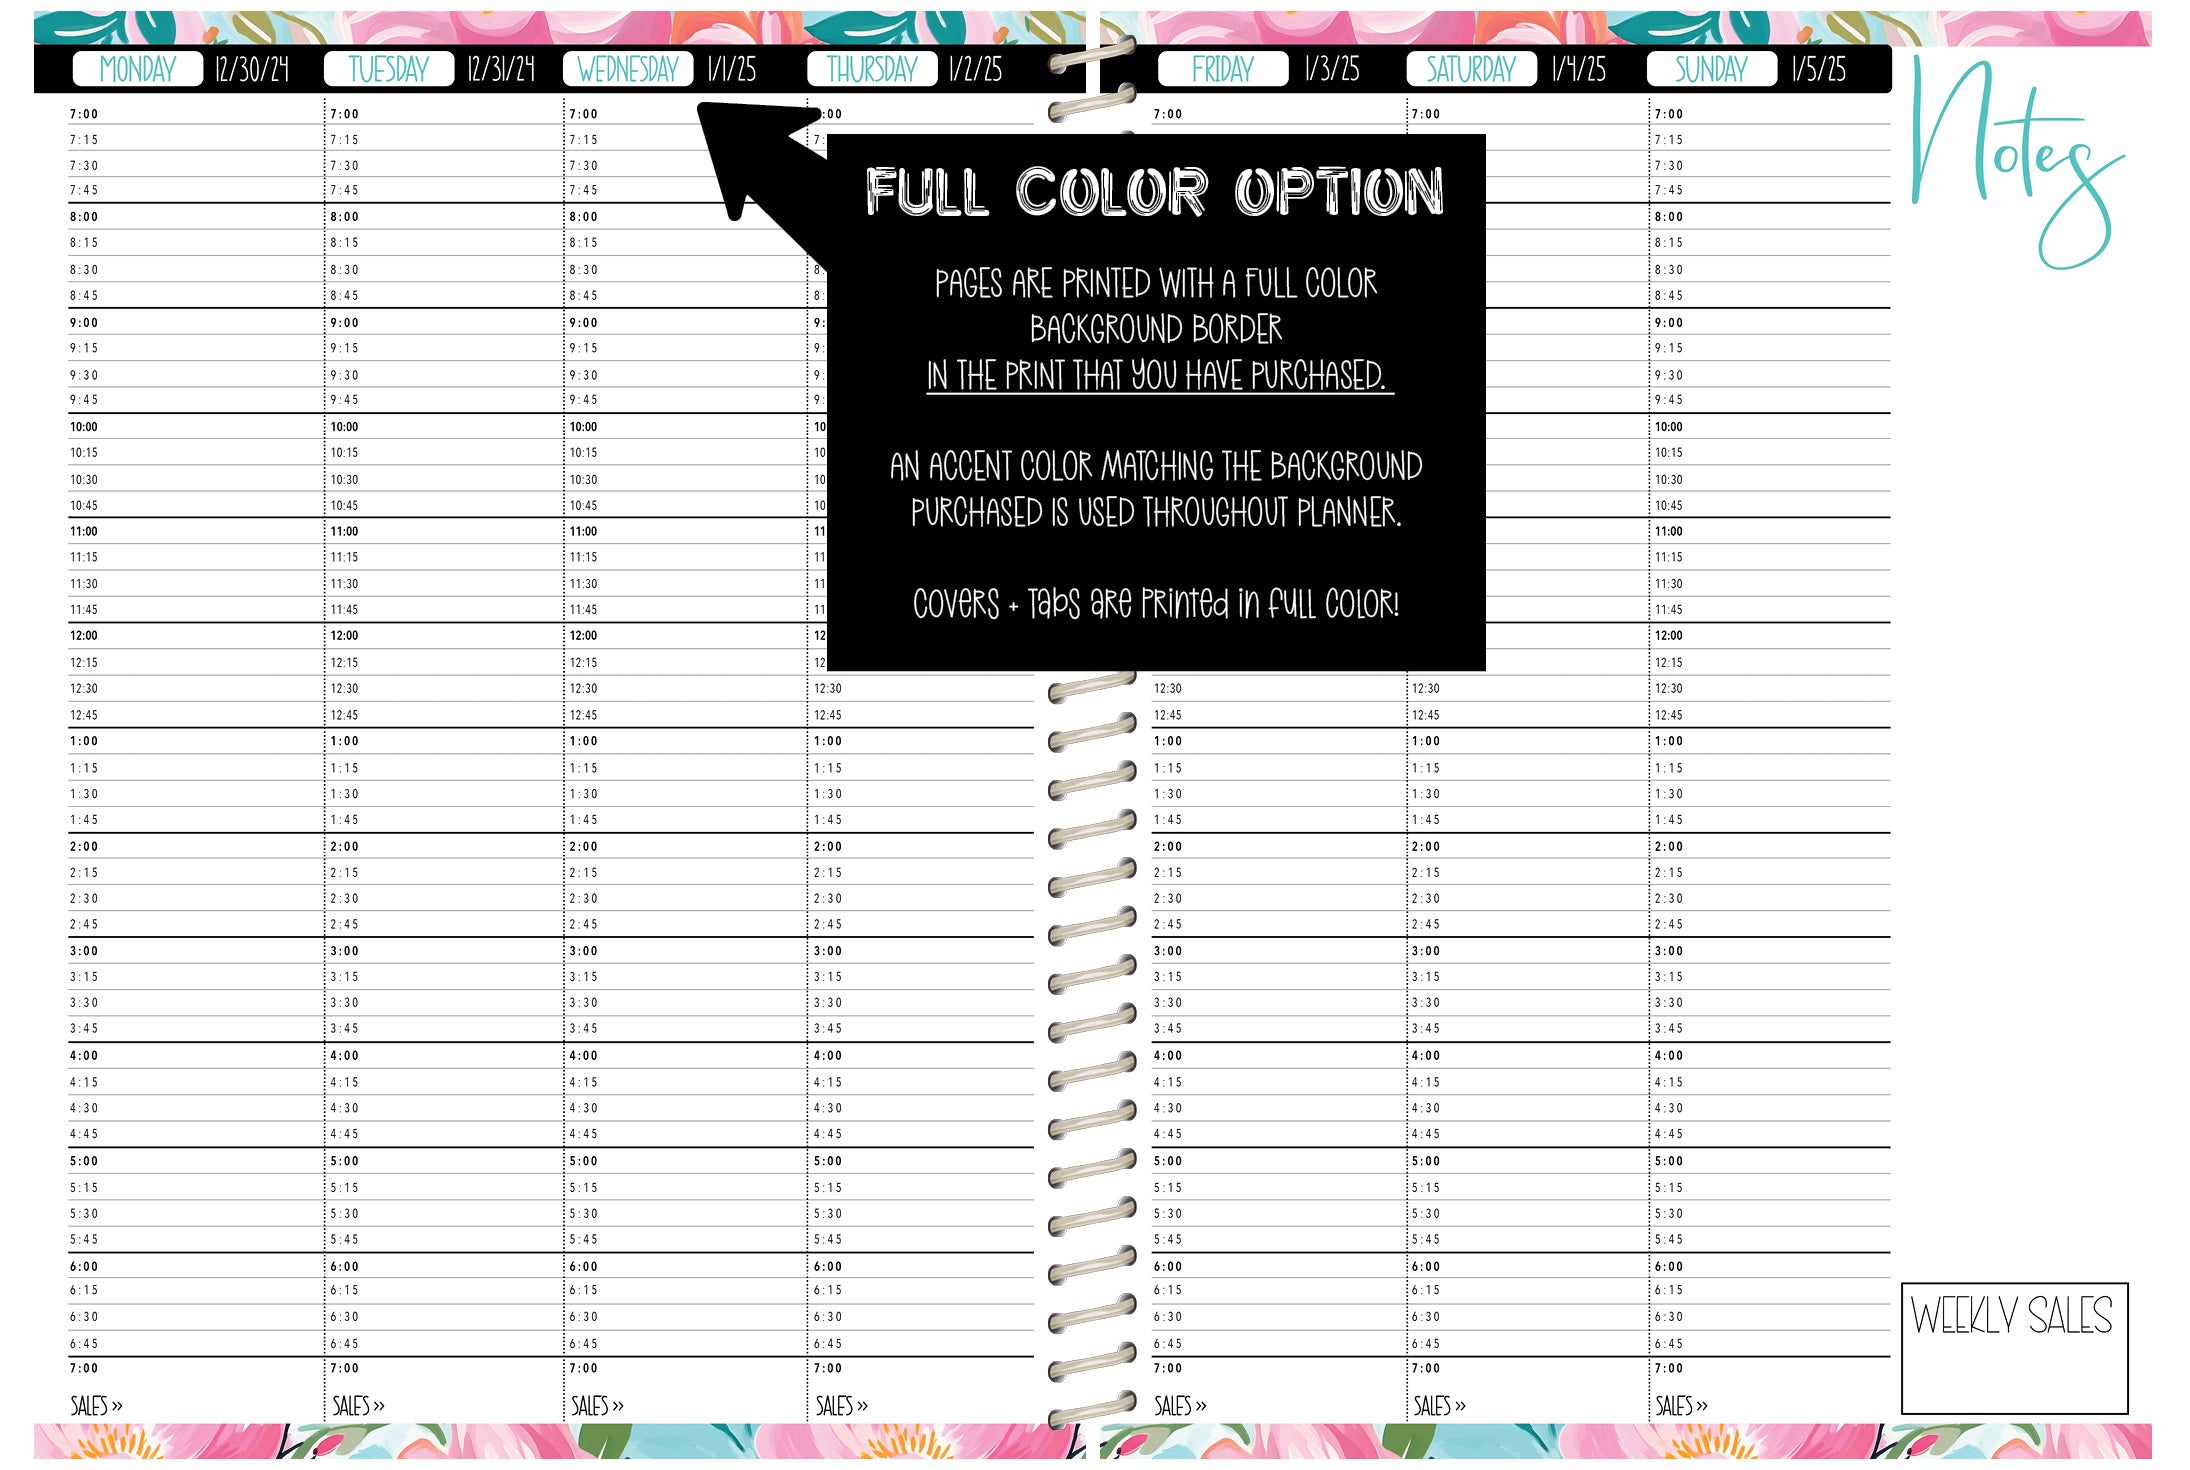 Dog Groomer Appointment Book - CHOOSE A KBD BACKGROUND